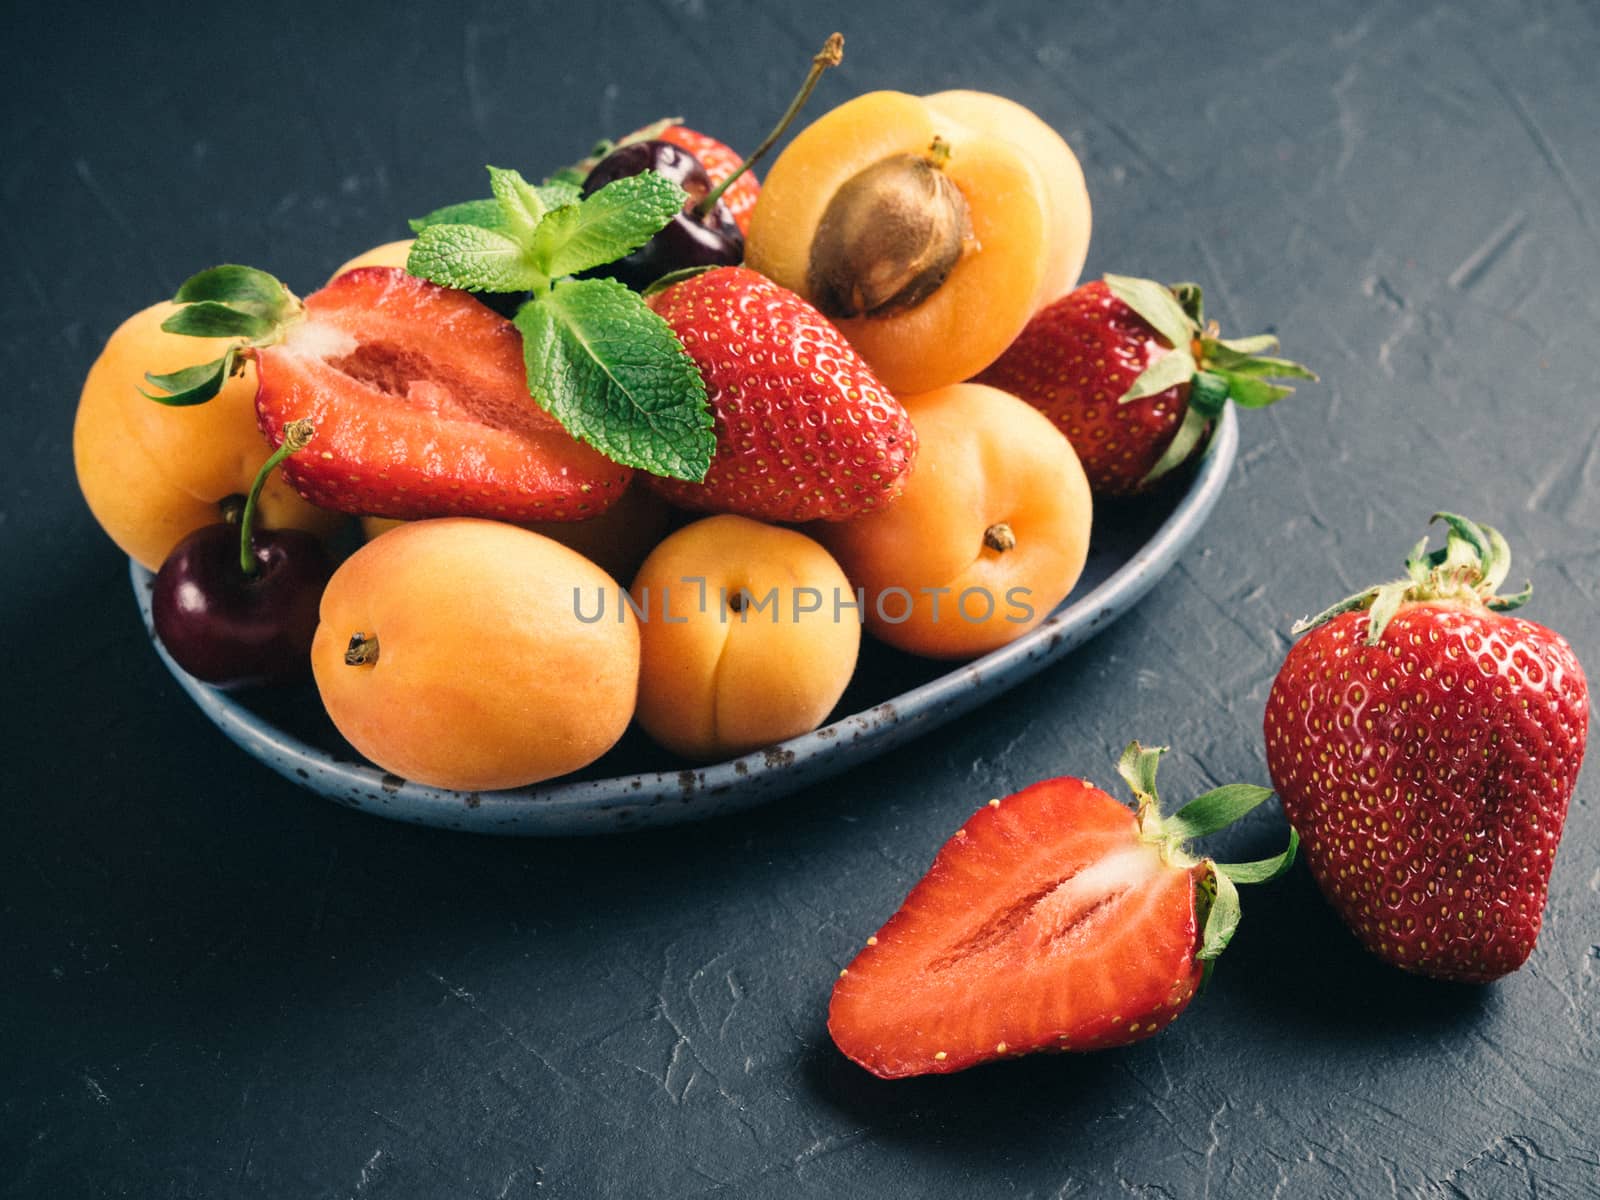 Closeup view of fruits and berries on dark background. Heap of fresh strawberries, blueberries, apricot and mint leaves in trendy plate. Focus on strawberry. Healthy food,superfood,diet,detox concept.